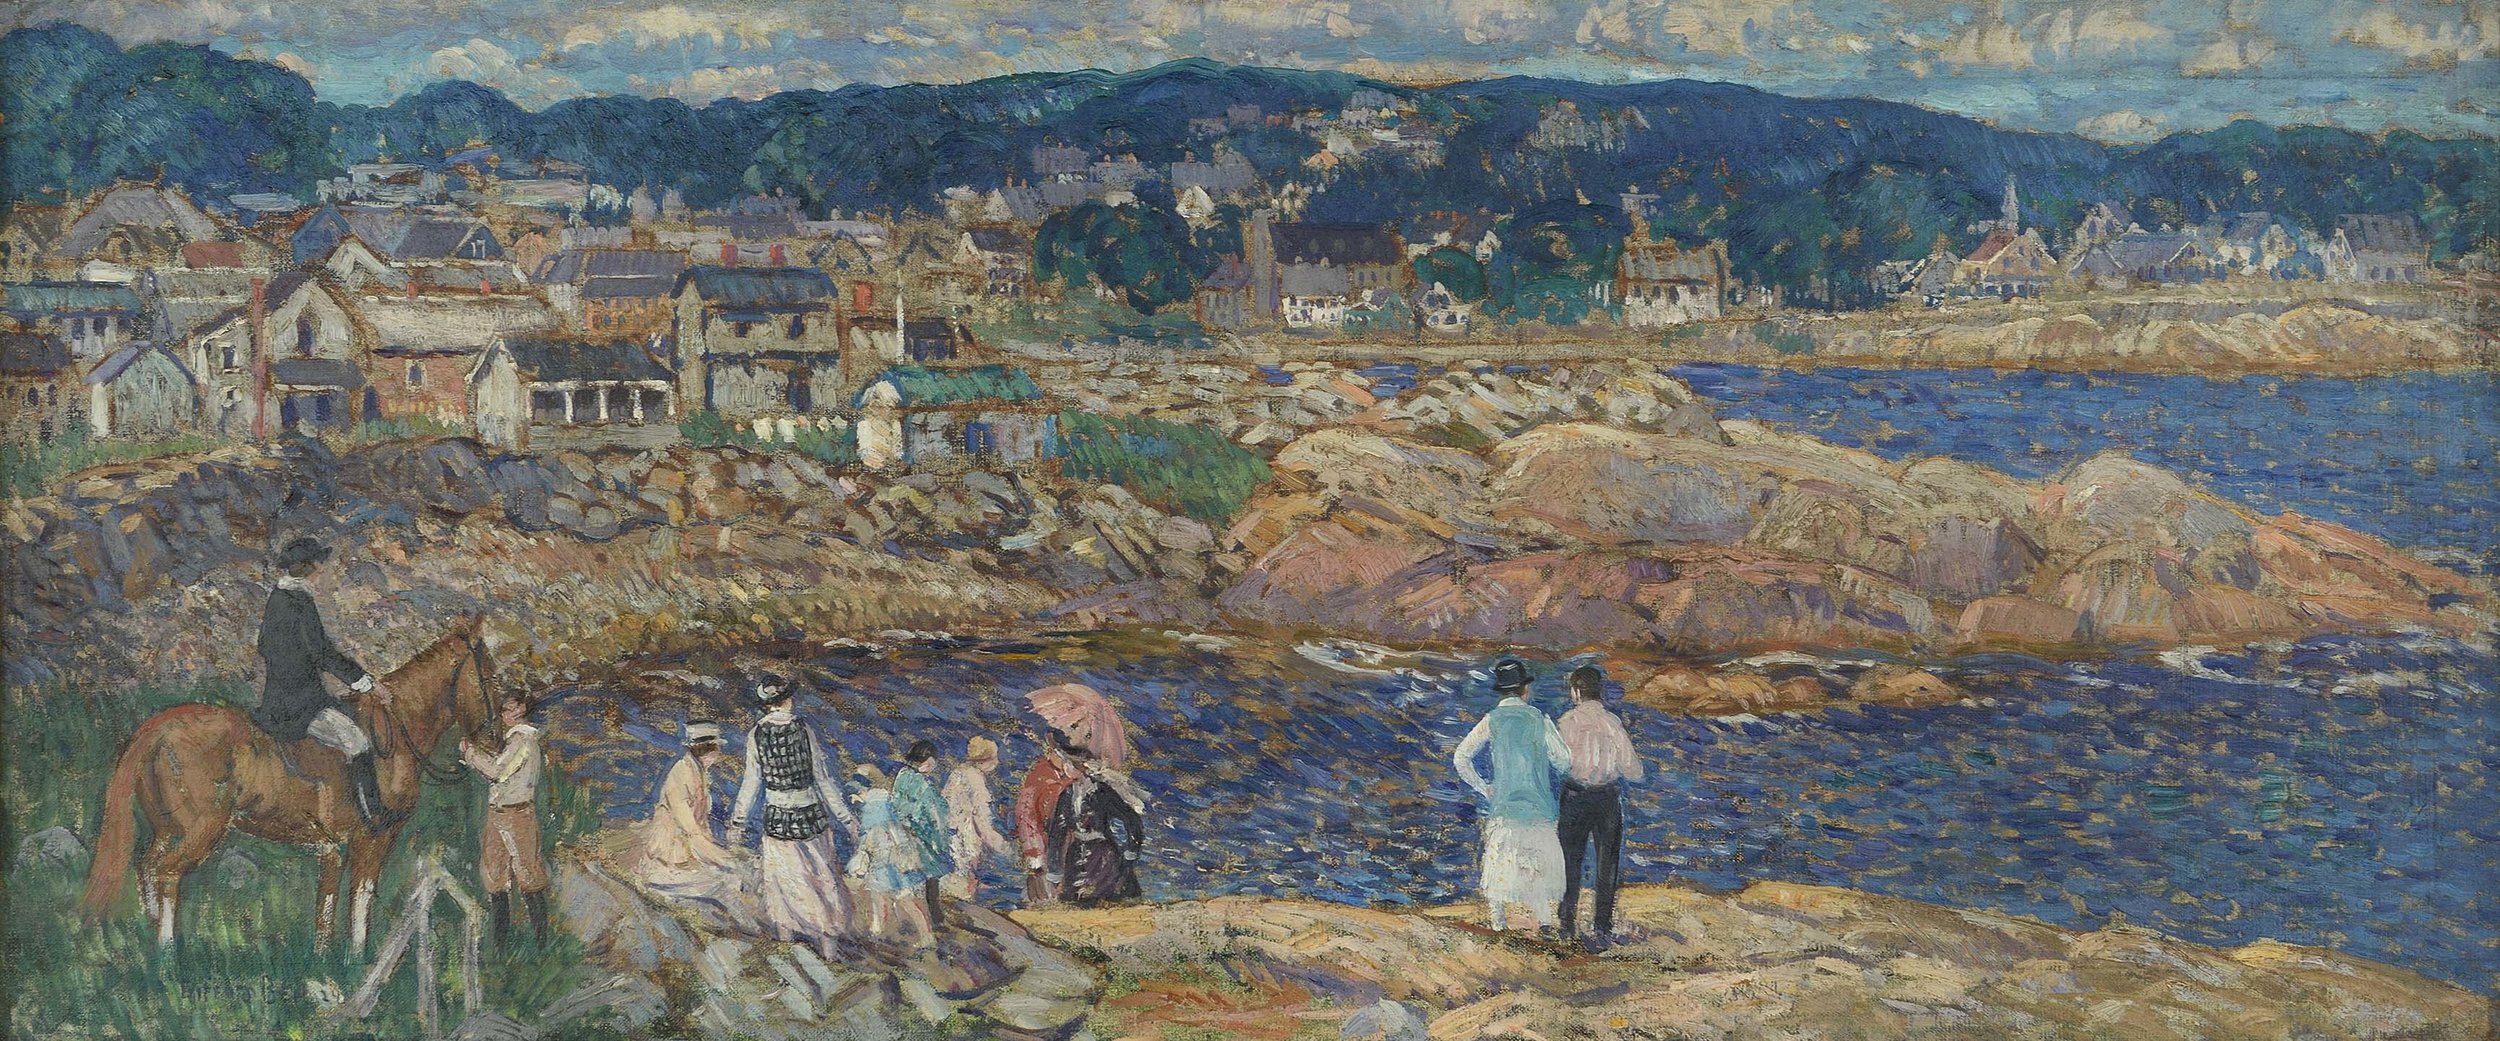 Painting of people standing on waterfront, horse (with rider) on left, houses and mountains in background.